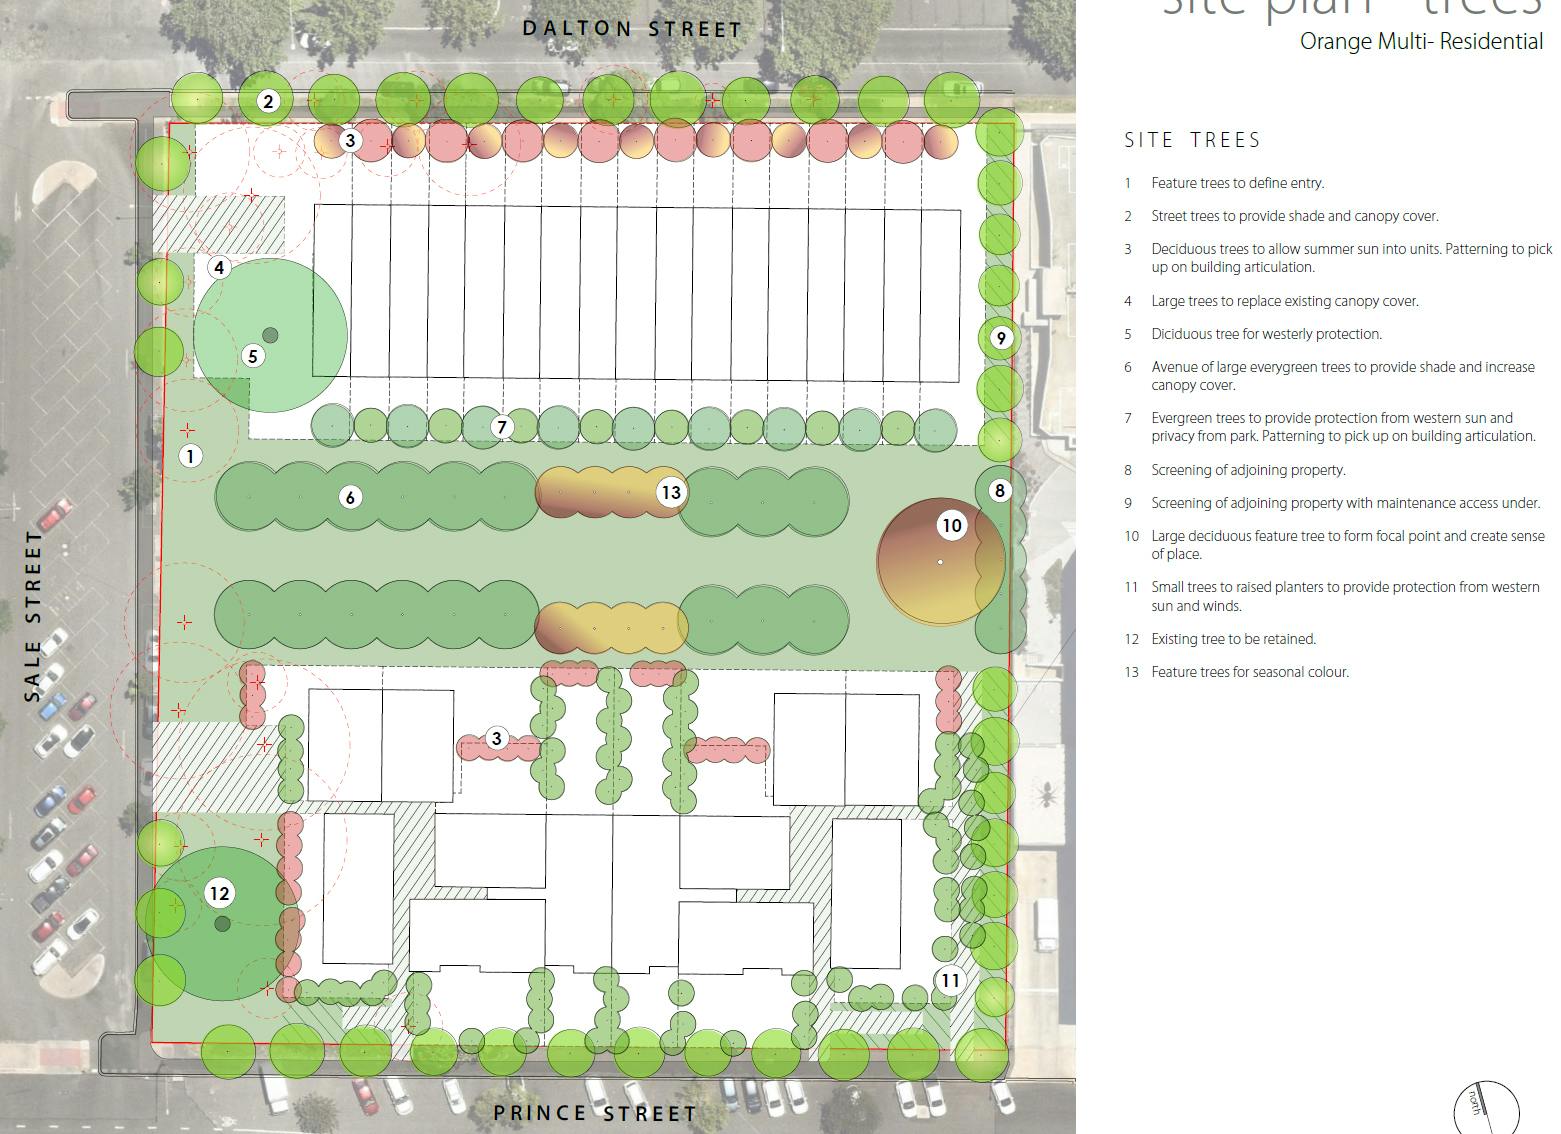 103 Prince Street Site plan for trees